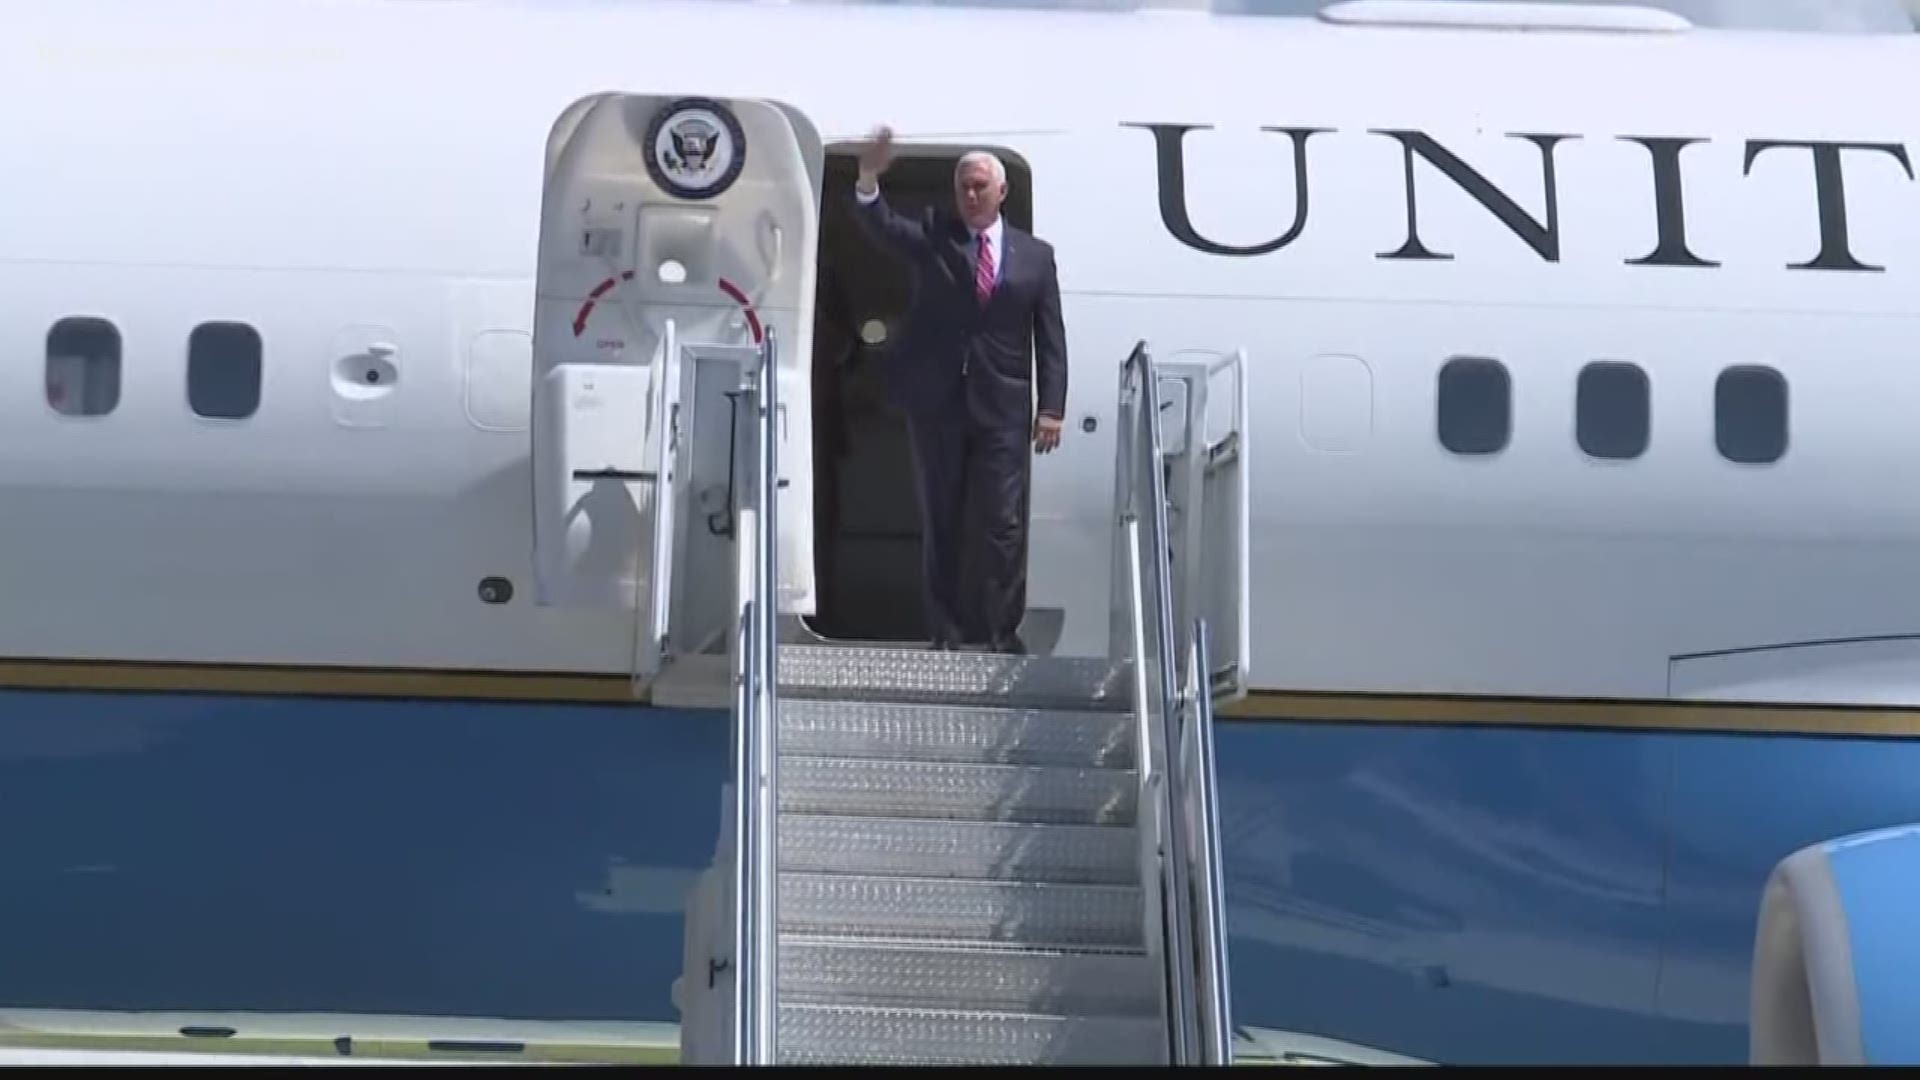 Vice President Mike Pence landed in Jacksonville on Monday to speak at an America First Policies series.